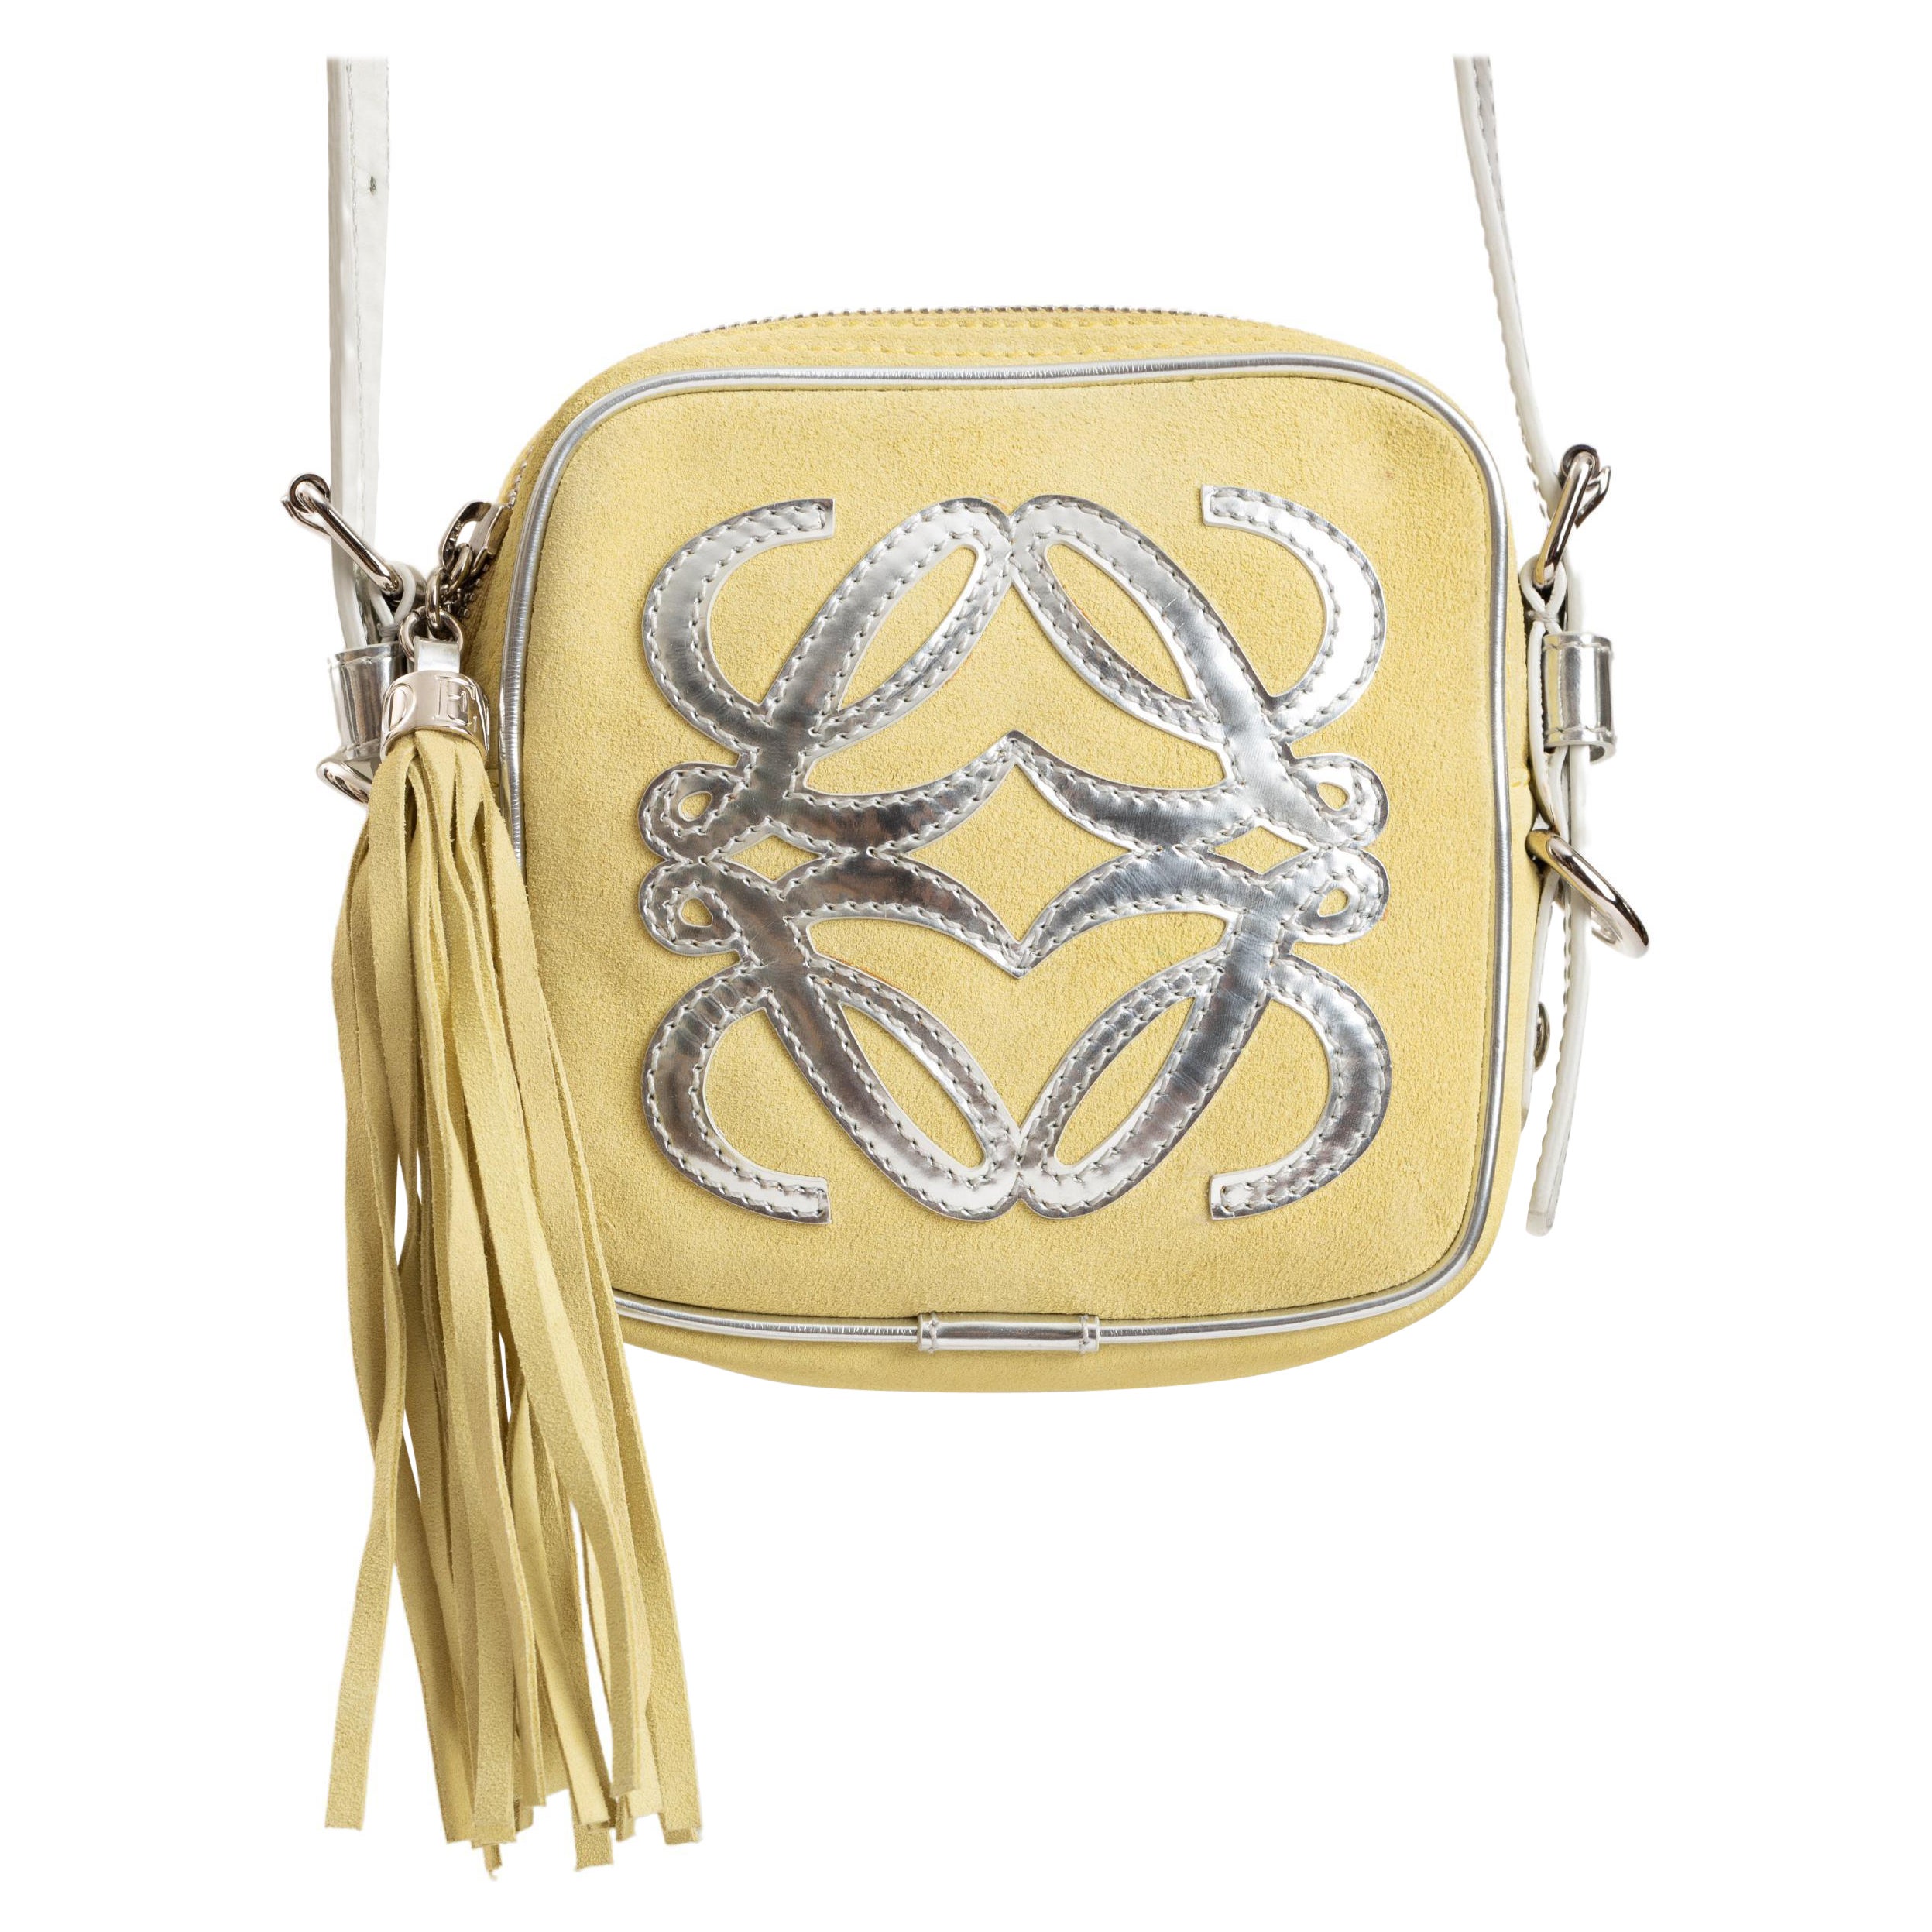 Loewe Pale Yellow Suede Leather Purse  With Silver Anagram